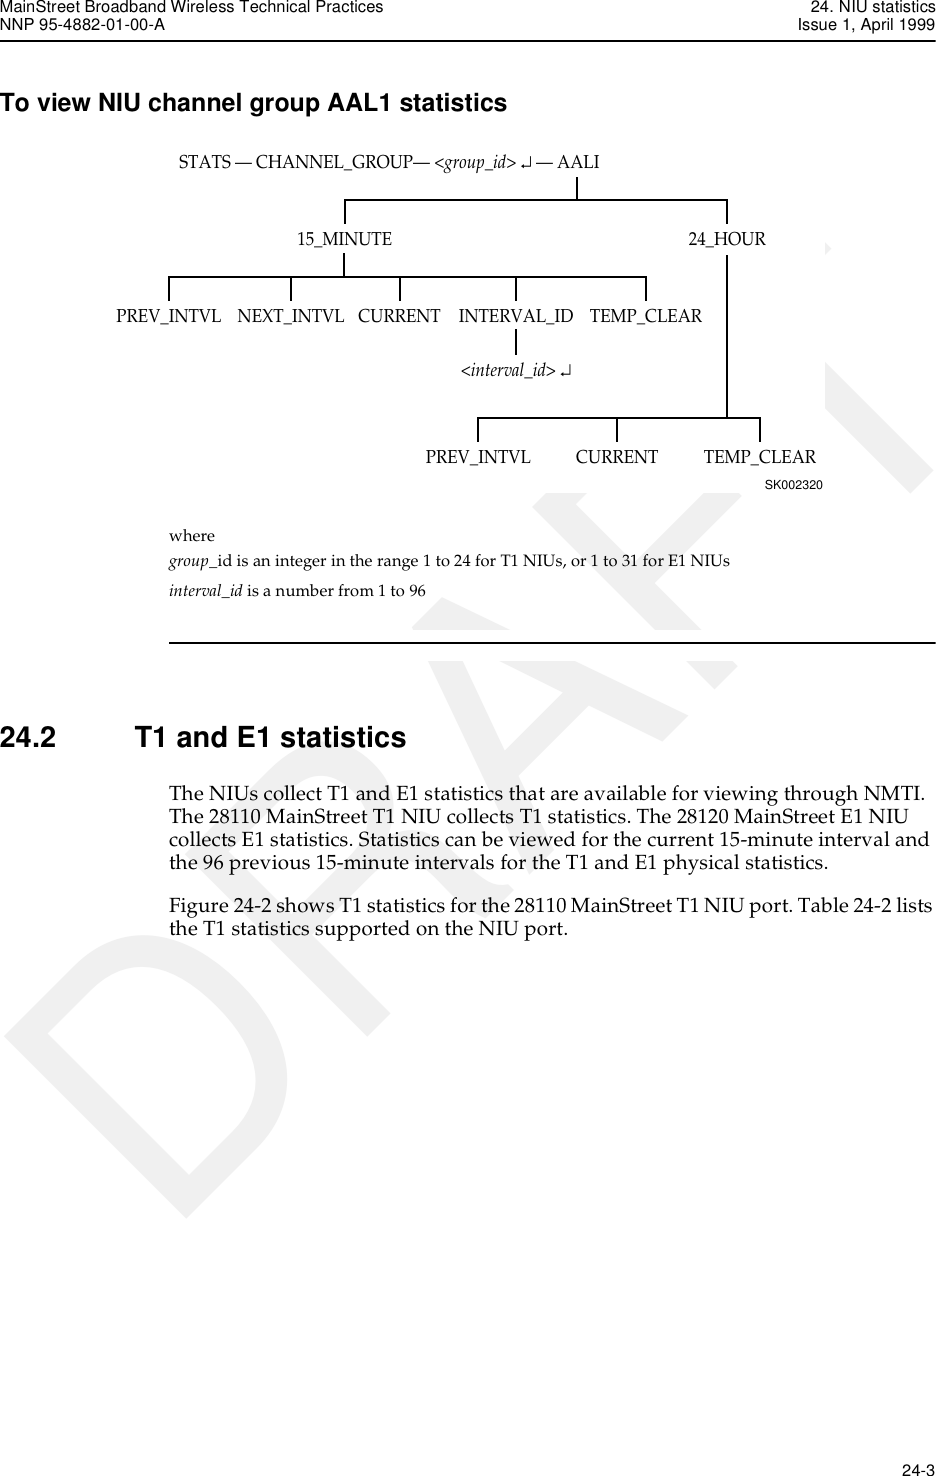 MainStreet Broadband Wireless Technical Practices 24. NIU statisticsNNP 95-4882-01-00-A Issue 1, April 1999   24-3DRAFTTo view NIU channel group AAL1 statisticswheregroup_id is an integer in the range 1 to 24 for T1 NIUs, or 1 to 31 for E1 NIUsinterval_id is a number from 1 to 9624.2 T1 and E1 statisticsThe NIUs collect T1 and E1 statistics that are available for viewing through NMTI. The 28110 MainStreet T1 NIU collects T1 statistics. The 28120 MainStreet E1 NIU collects E1 statistics. Statistics can be viewed for the current 15-minute interval and the 96 previous 15-minute intervals for the T1 and E1 physical statistics.Figure 24-2 shows T1 statistics for the 28110 MainStreet T1 NIU port. Table 24-2 lists the T1 statistics supported on the NIU port.STATS — CHANNEL_GROUP— &lt;group_id&gt; ↵ — AALISK00232024_HOUR15_MINUTEINTERVAL_ID&lt;interval_id&gt; ↵TEMP_CLEARPREV_INTVL NEXT_INTVL CURRENTTEMP_CLEARPREV_INTVL CURRENT